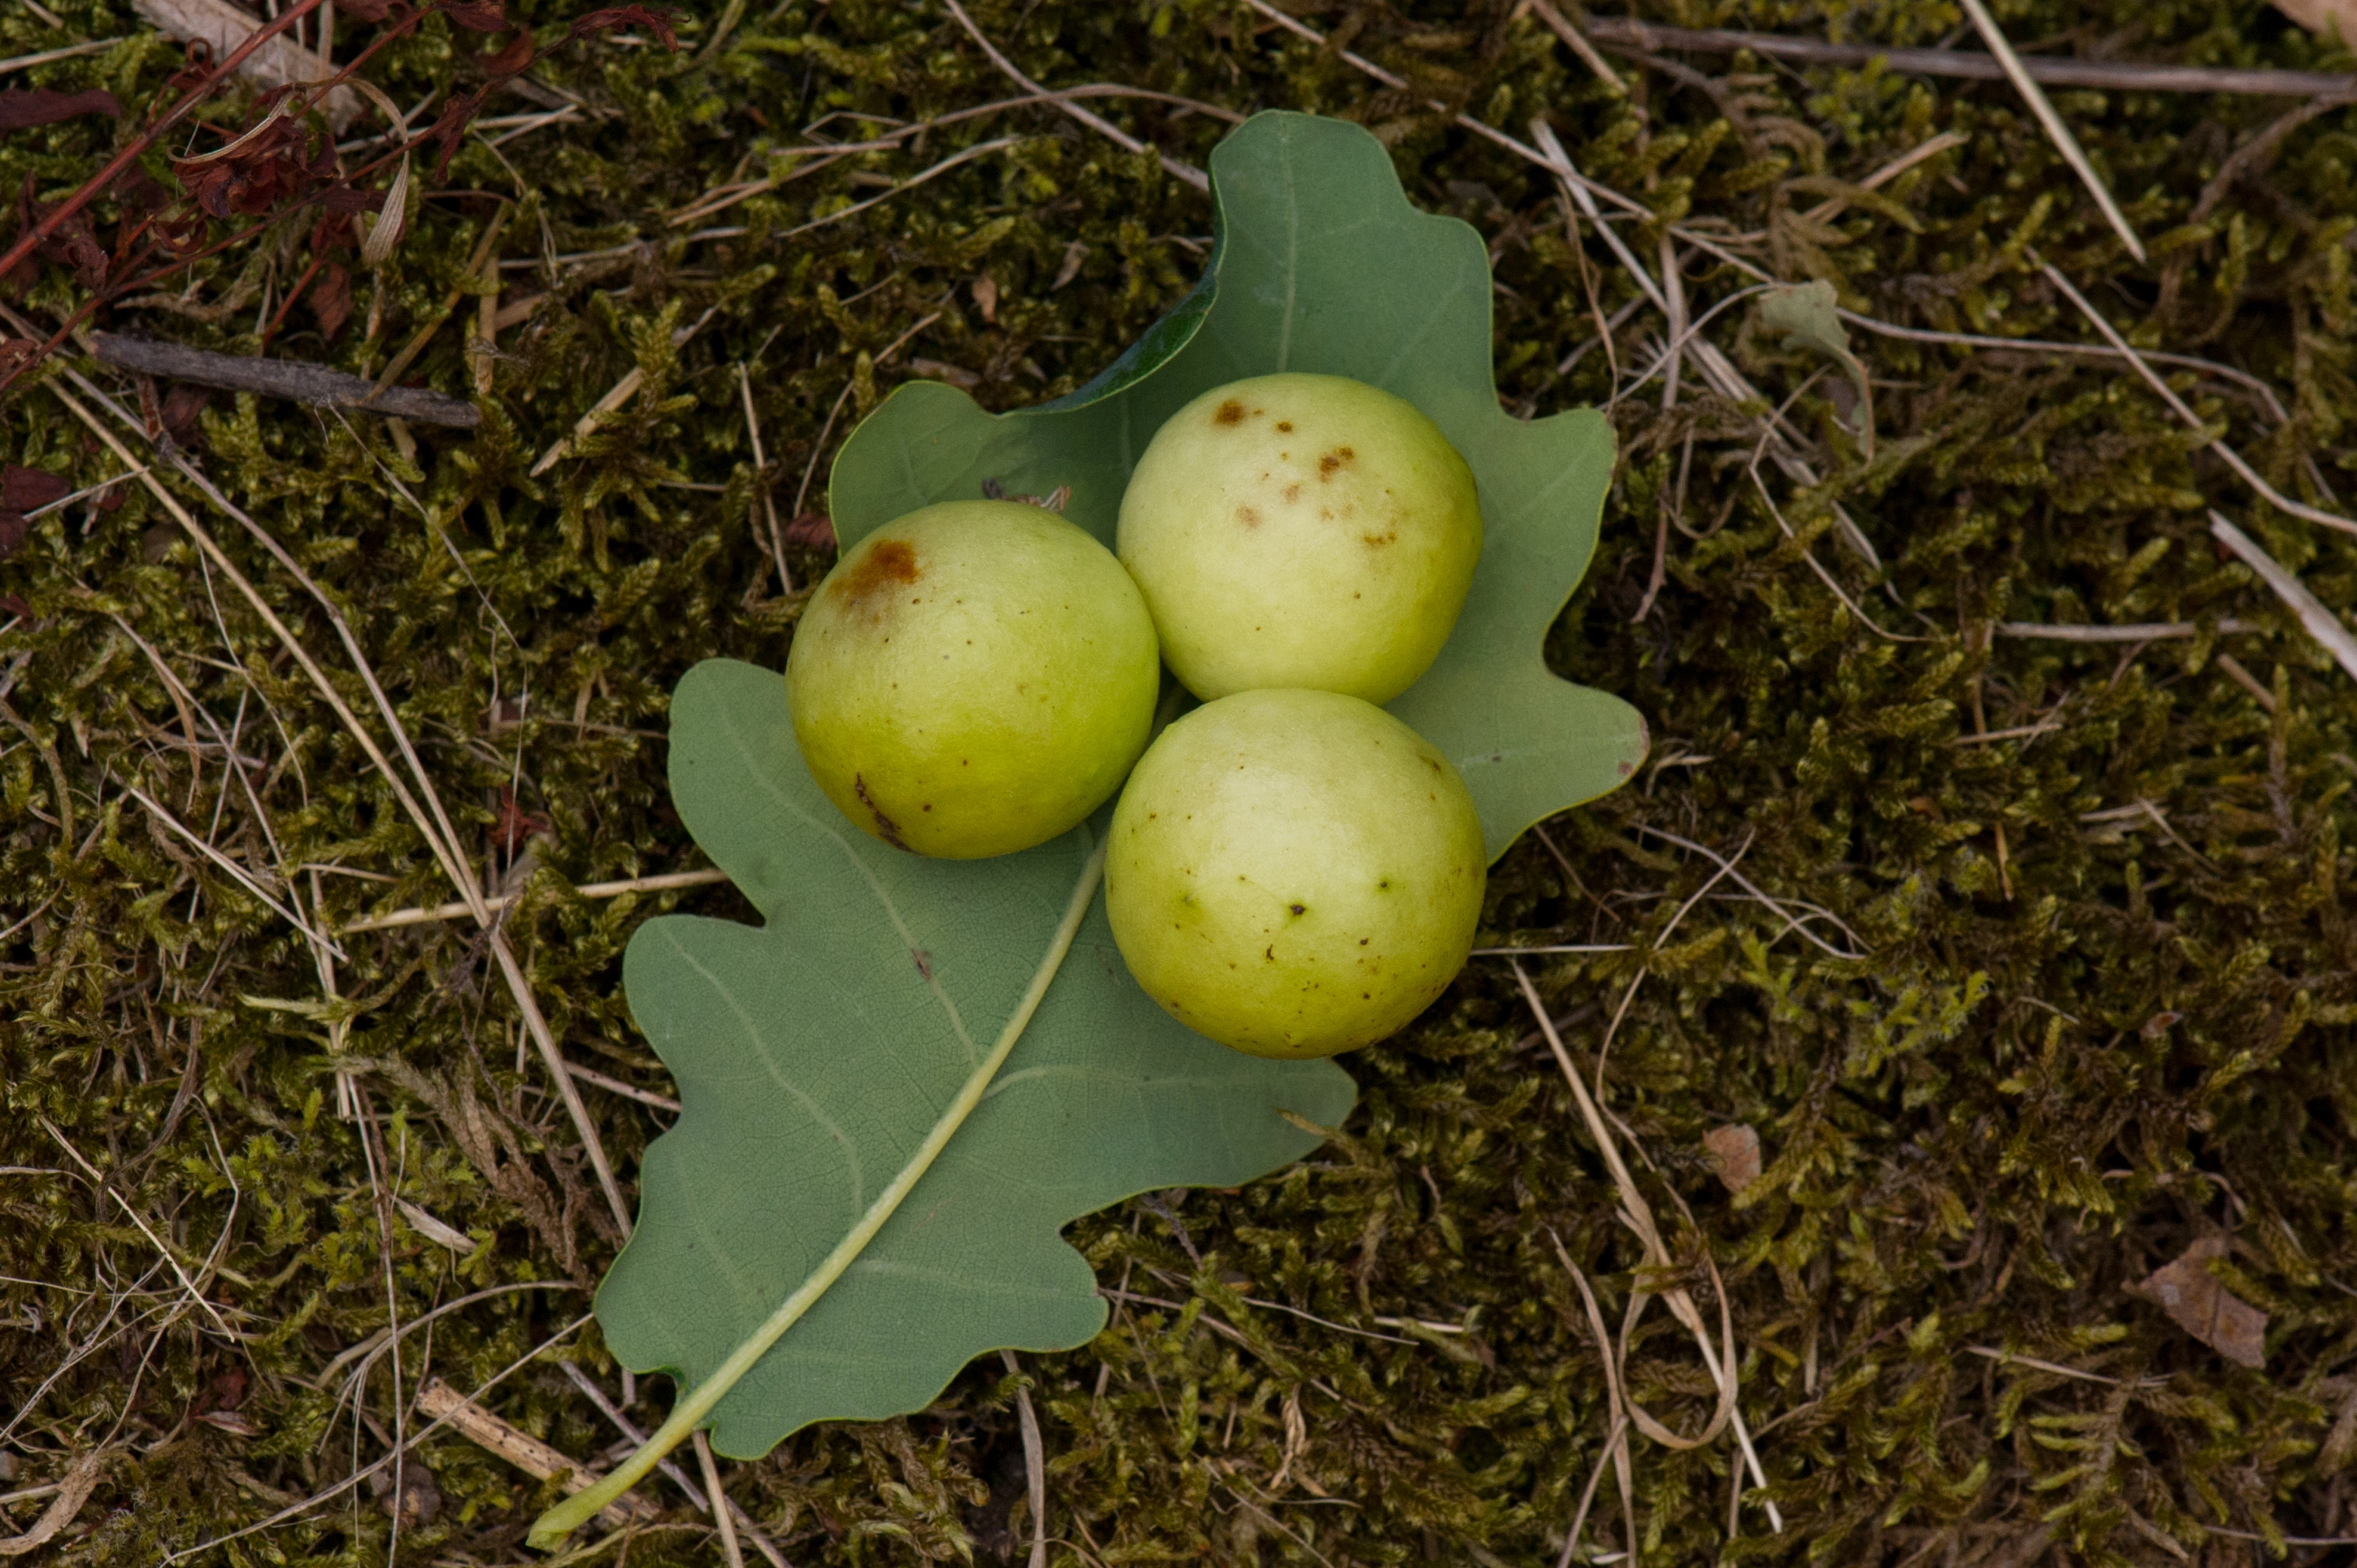 Vepser: Cynips quercusfolii.